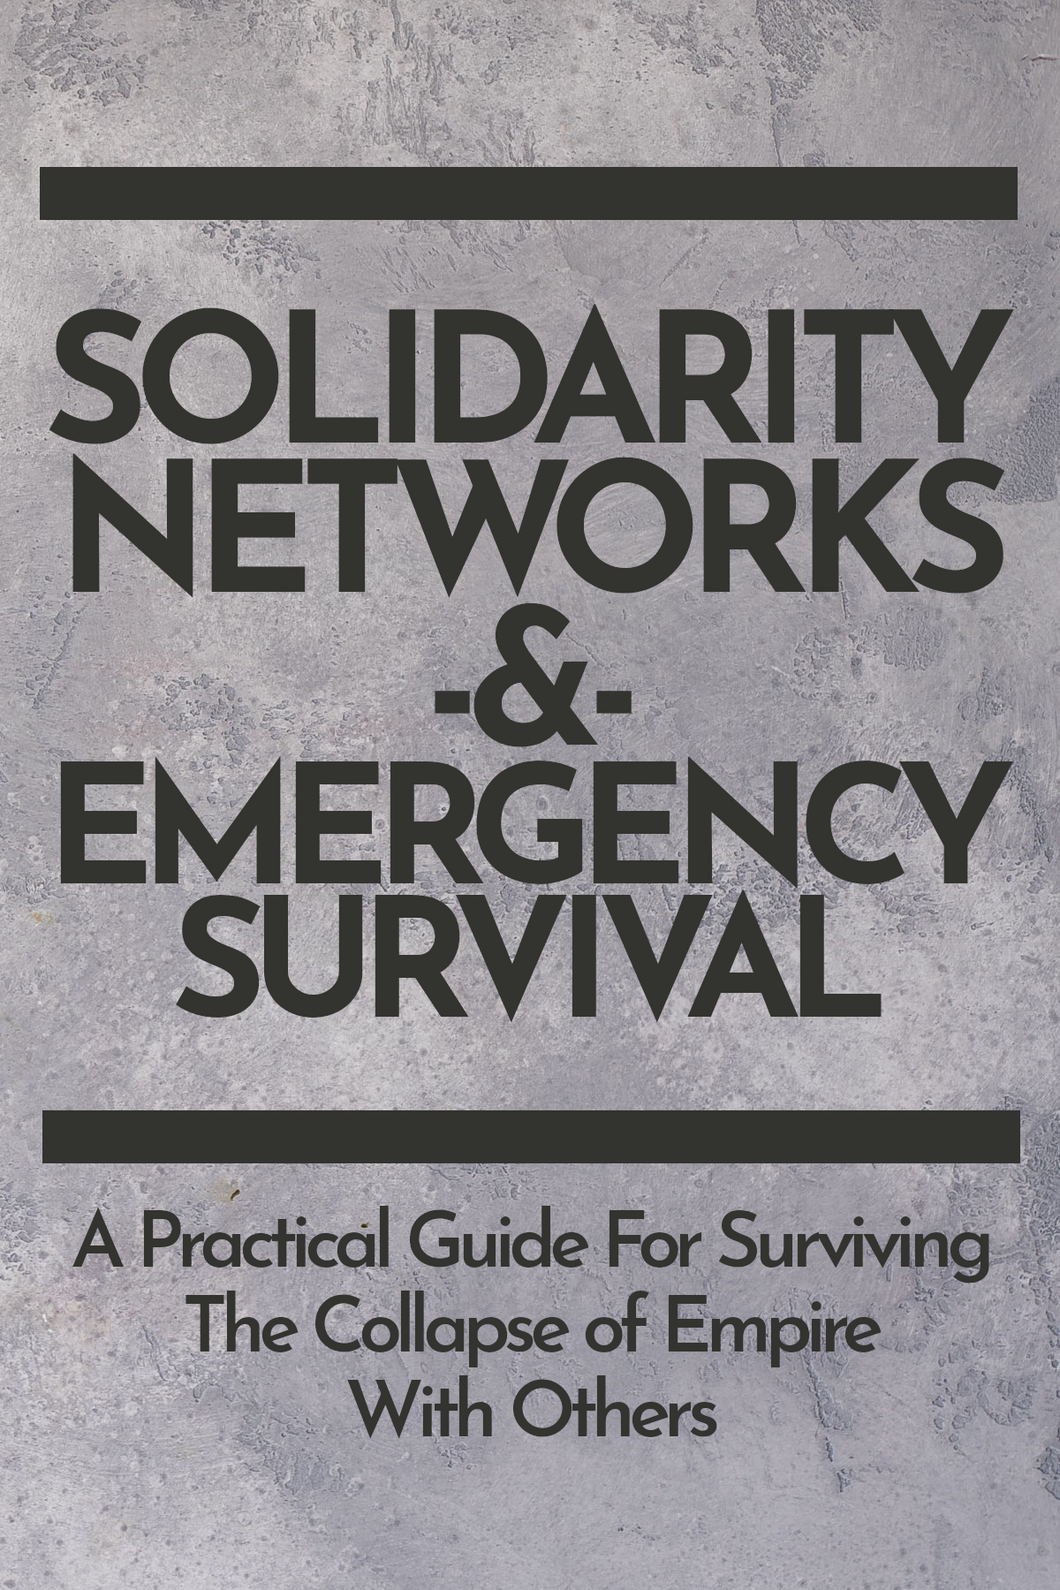 Solidarity Networks & Emergency Survival: A Practical Guide For Surviving The Collapse of Empire With Others